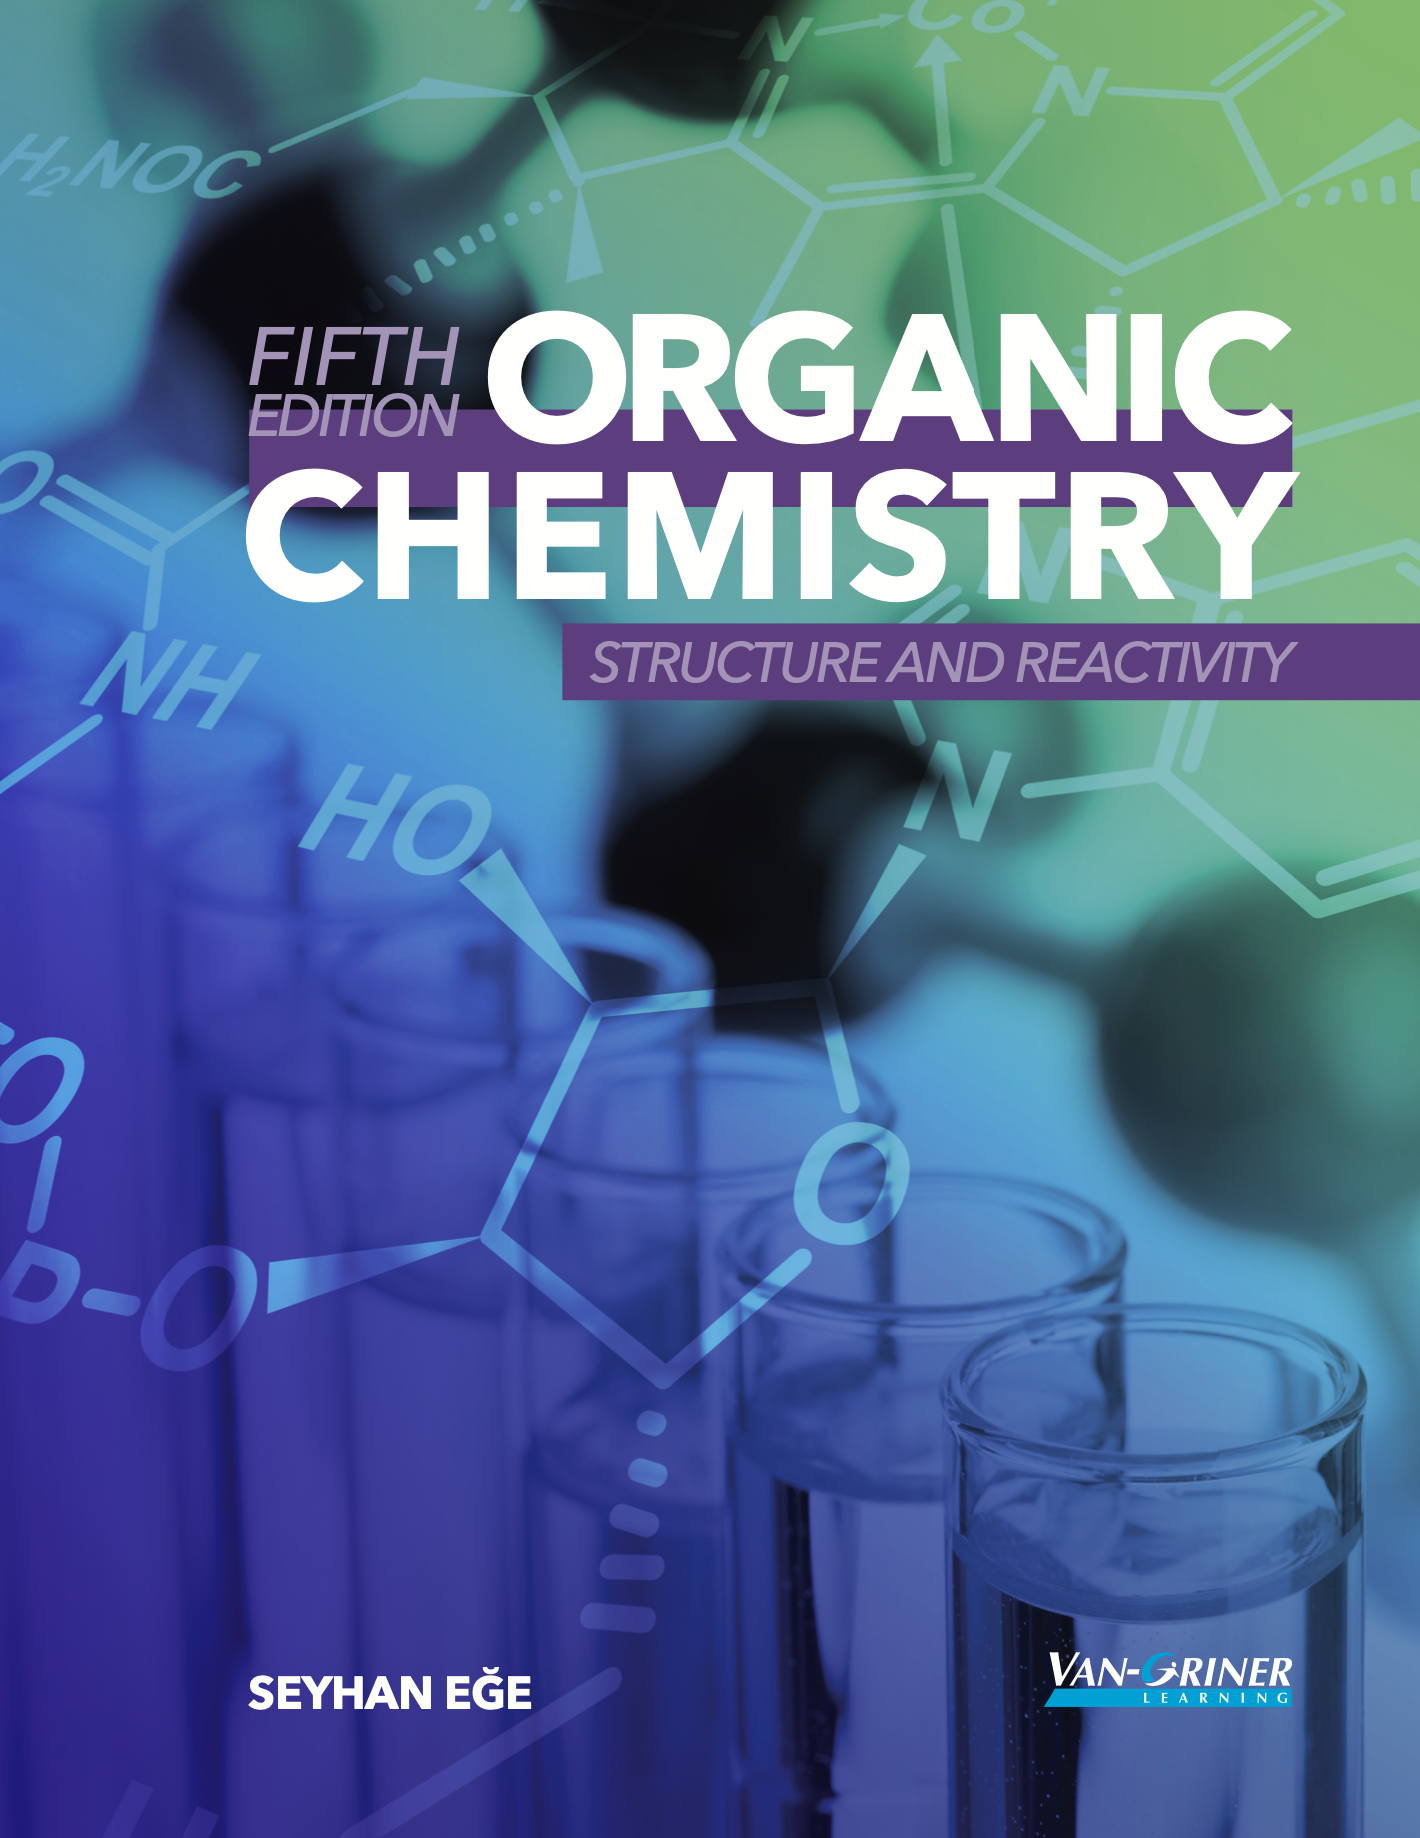 Griner　Van　Chemistry;　–　Structure　Reactivity　and　Organic　Learning